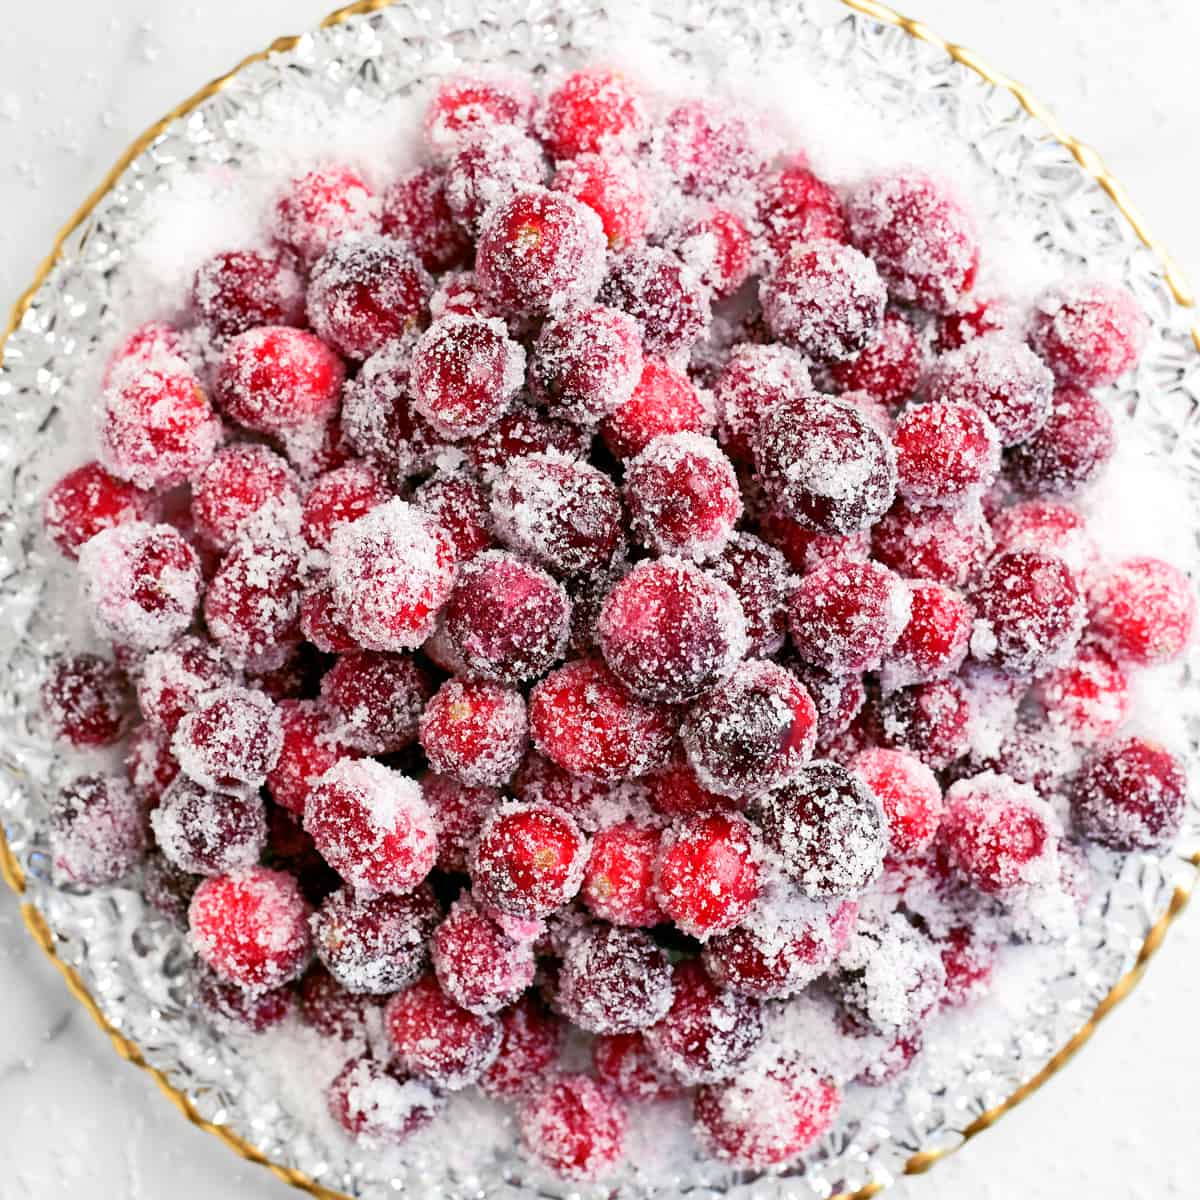 sugared cranberries in a pile on a gold rimmed plate